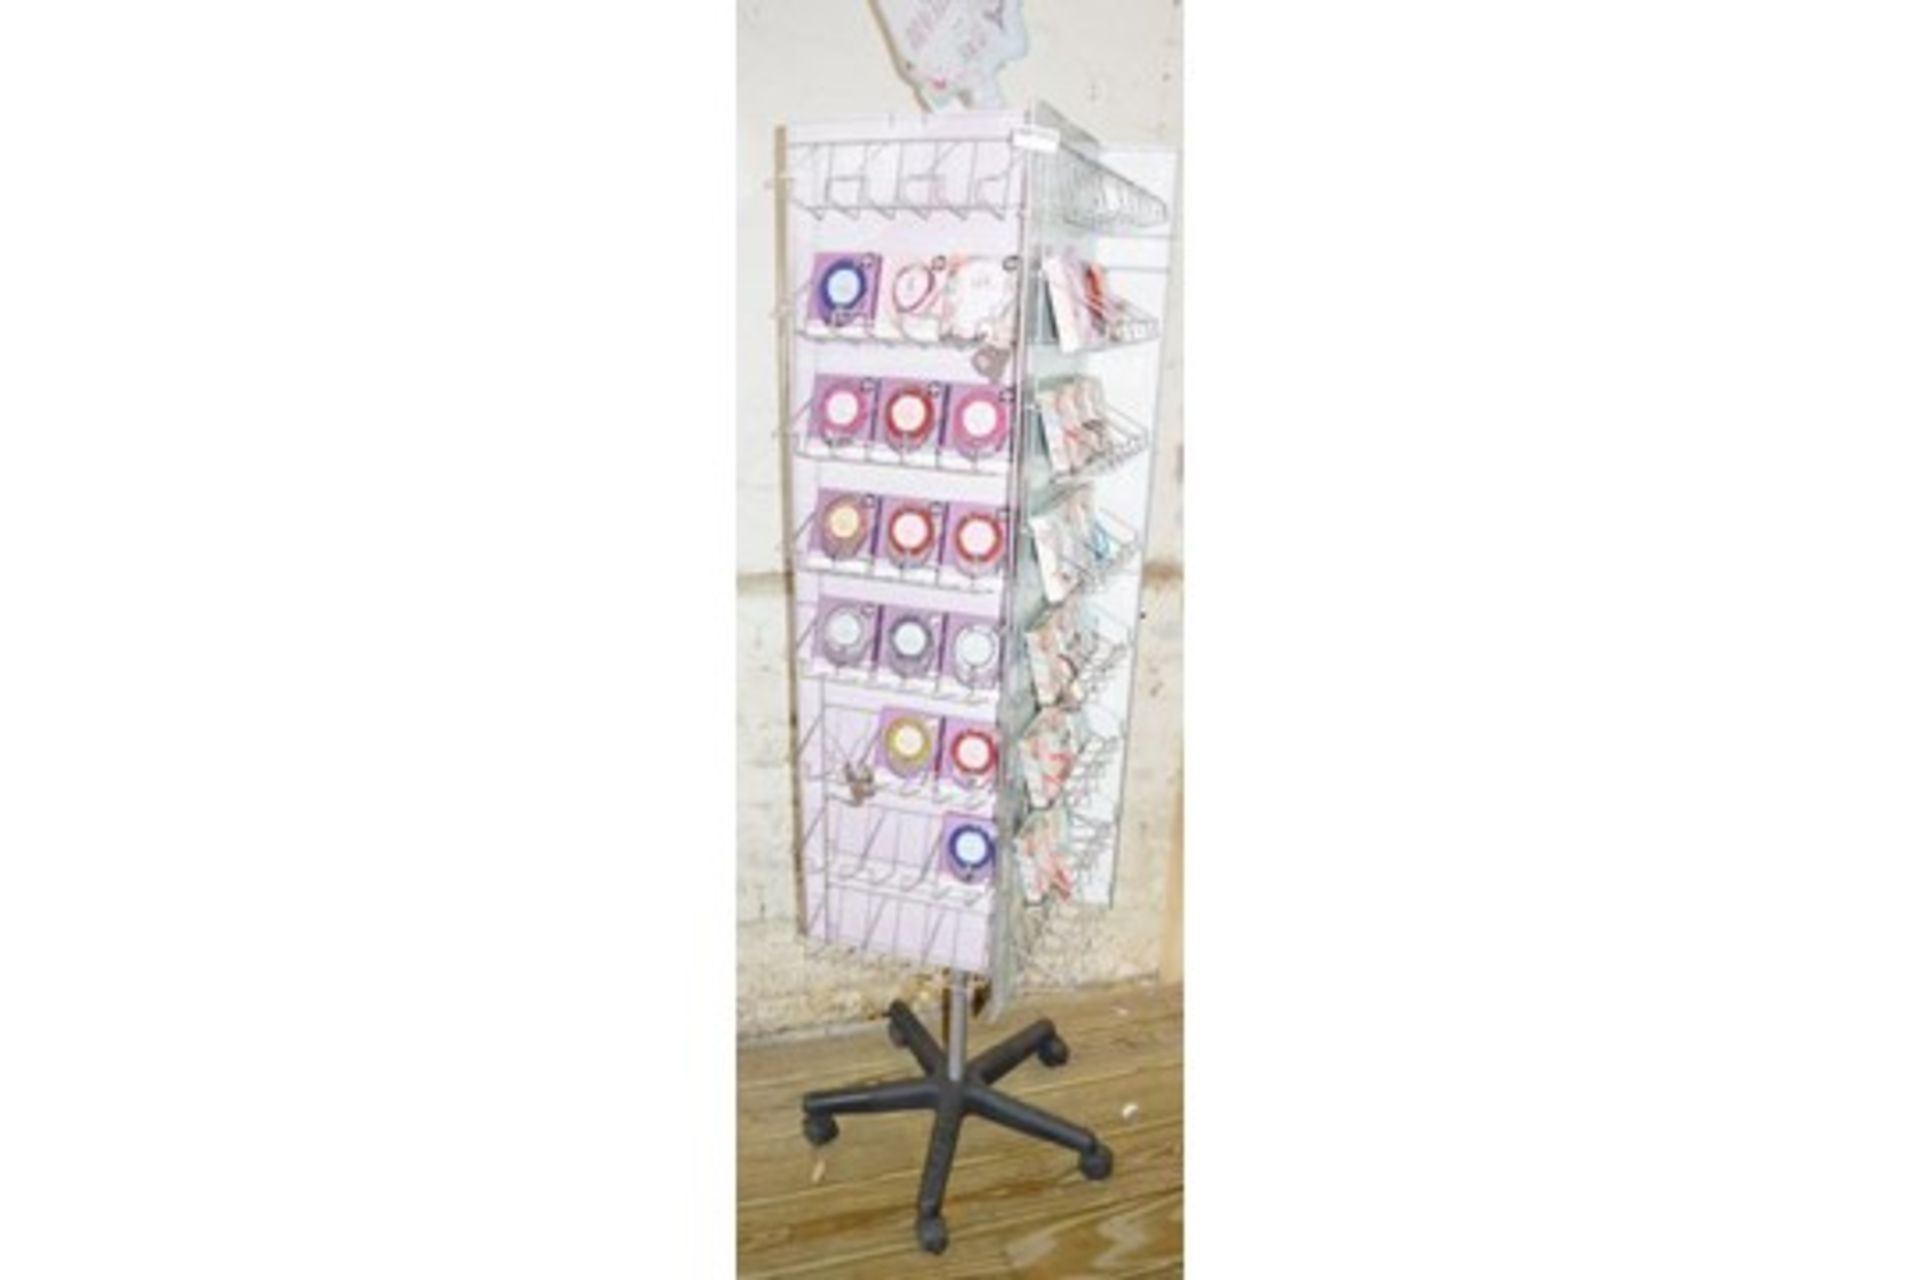 27 x Retail Carousel Display Stands With Approximately 2,800 Items of Resale Stock - Includes - Image 2 of 61